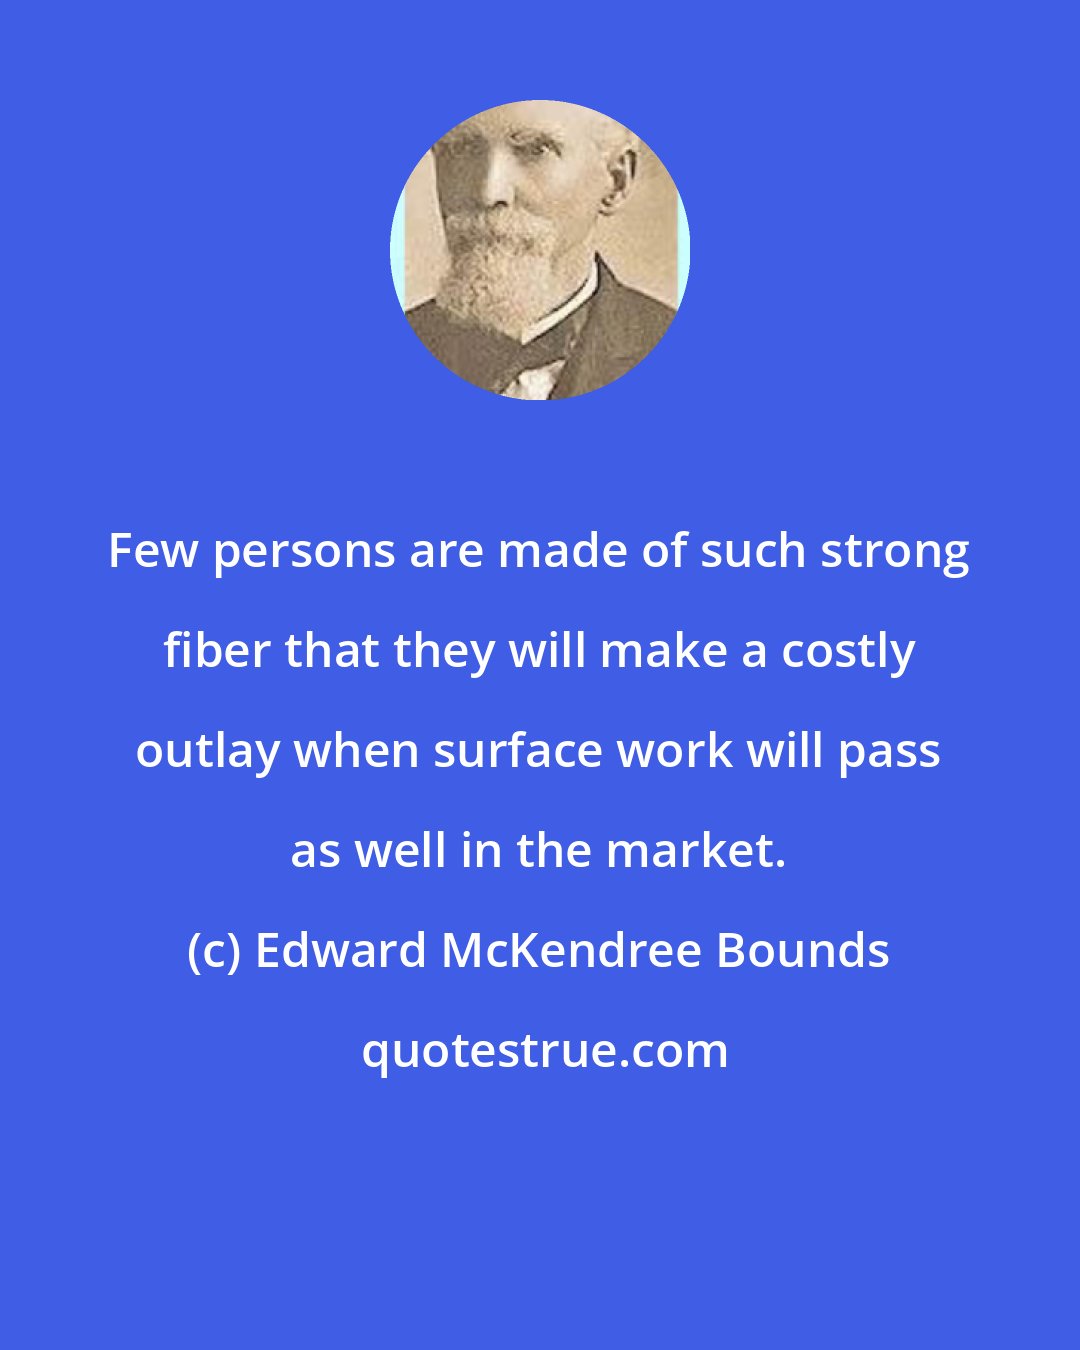 Edward McKendree Bounds: Few persons are made of such strong fiber that they will make a costly outlay when surface work will pass as well in the market.